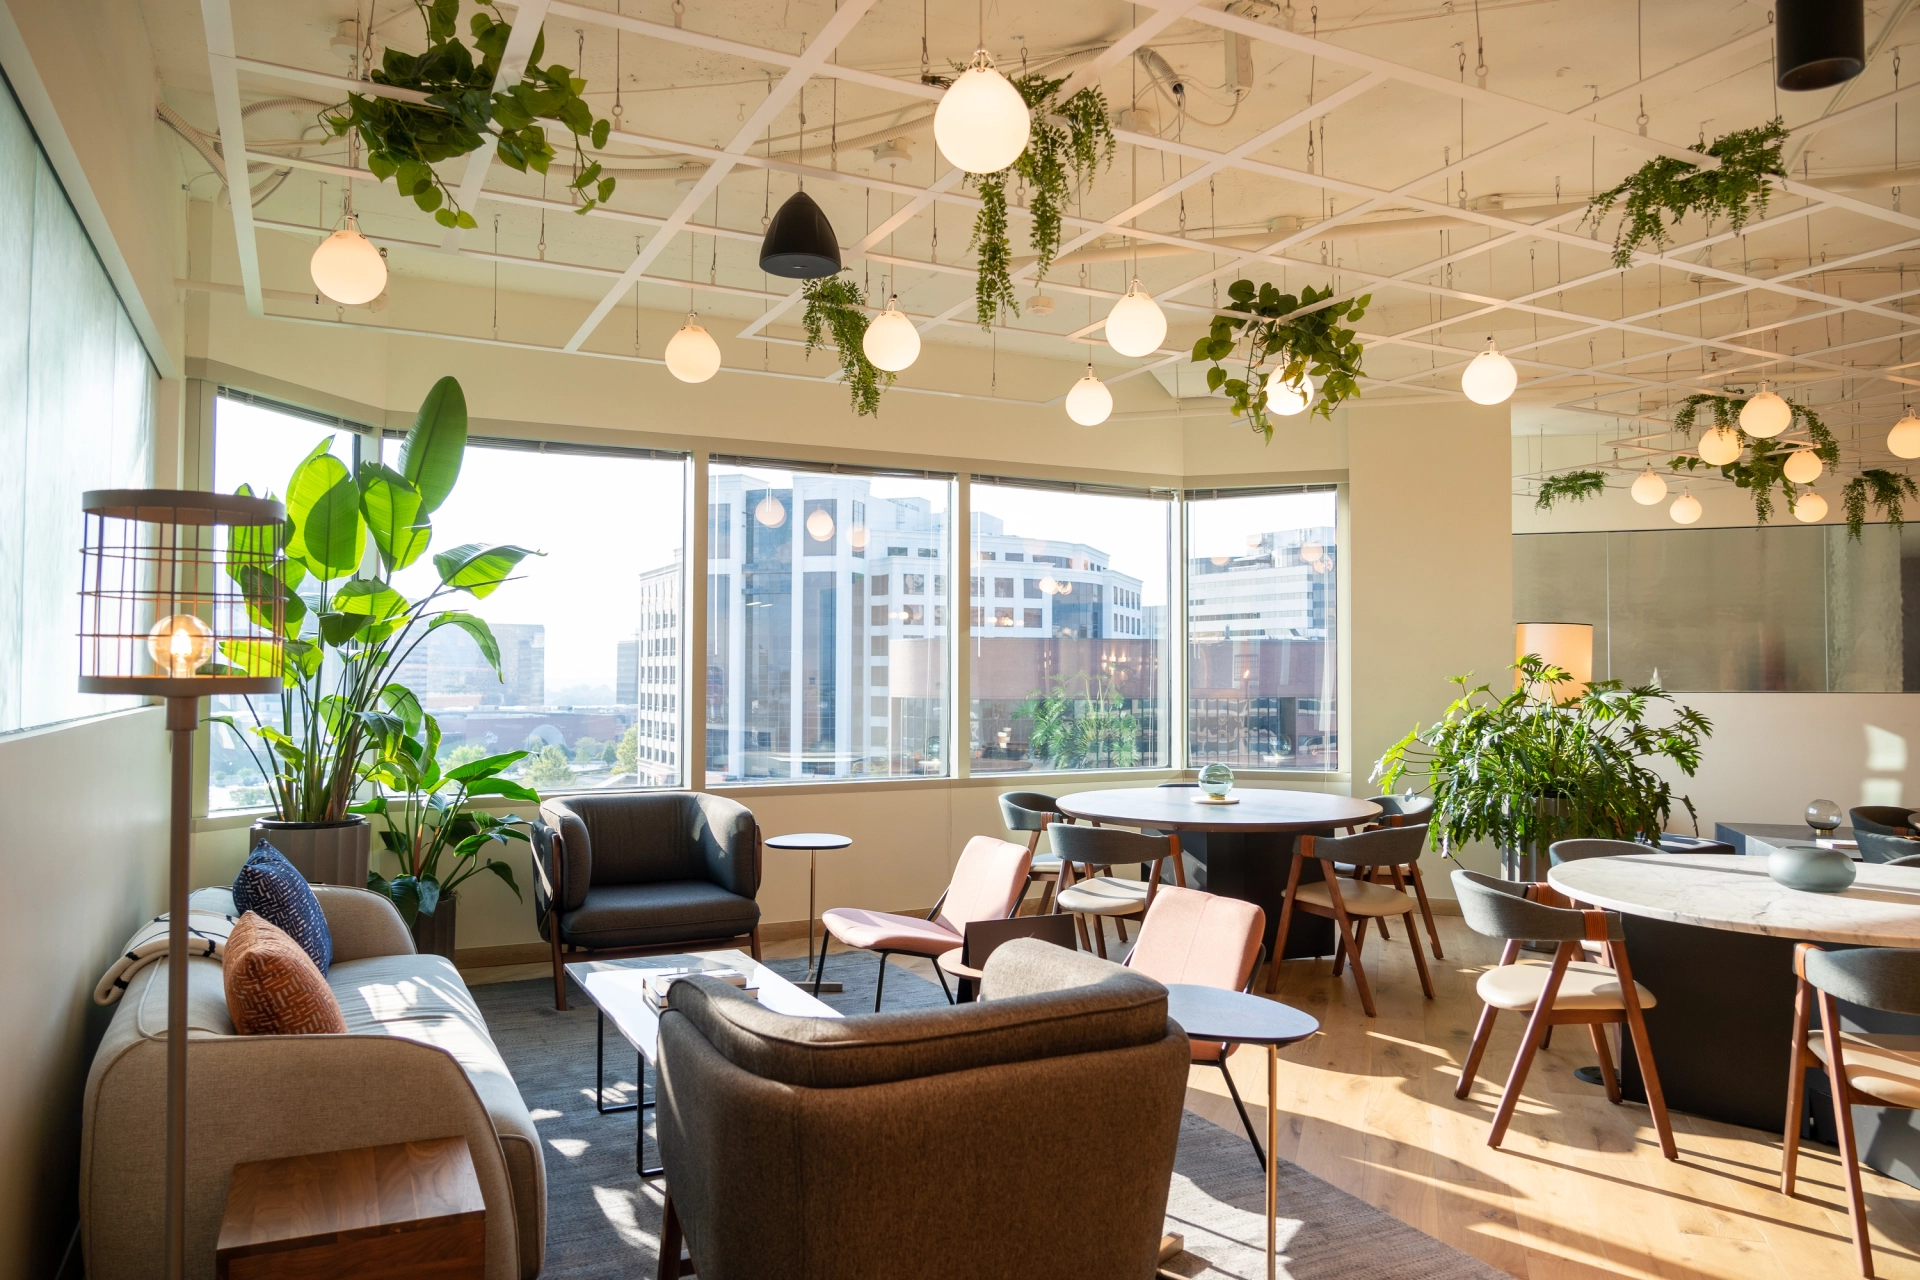 A workspace or office with an abundance of plants hanging from the ceiling.